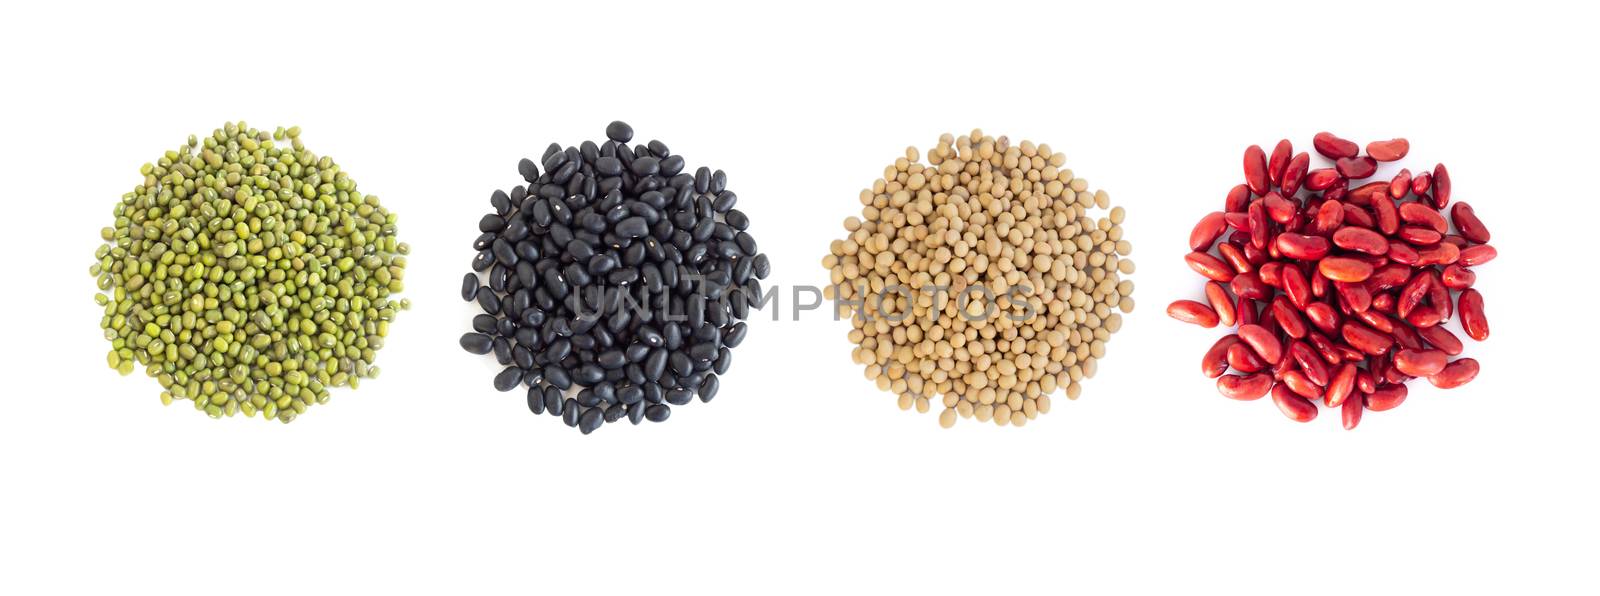 Mix beans isolated on white background, healthy food concept